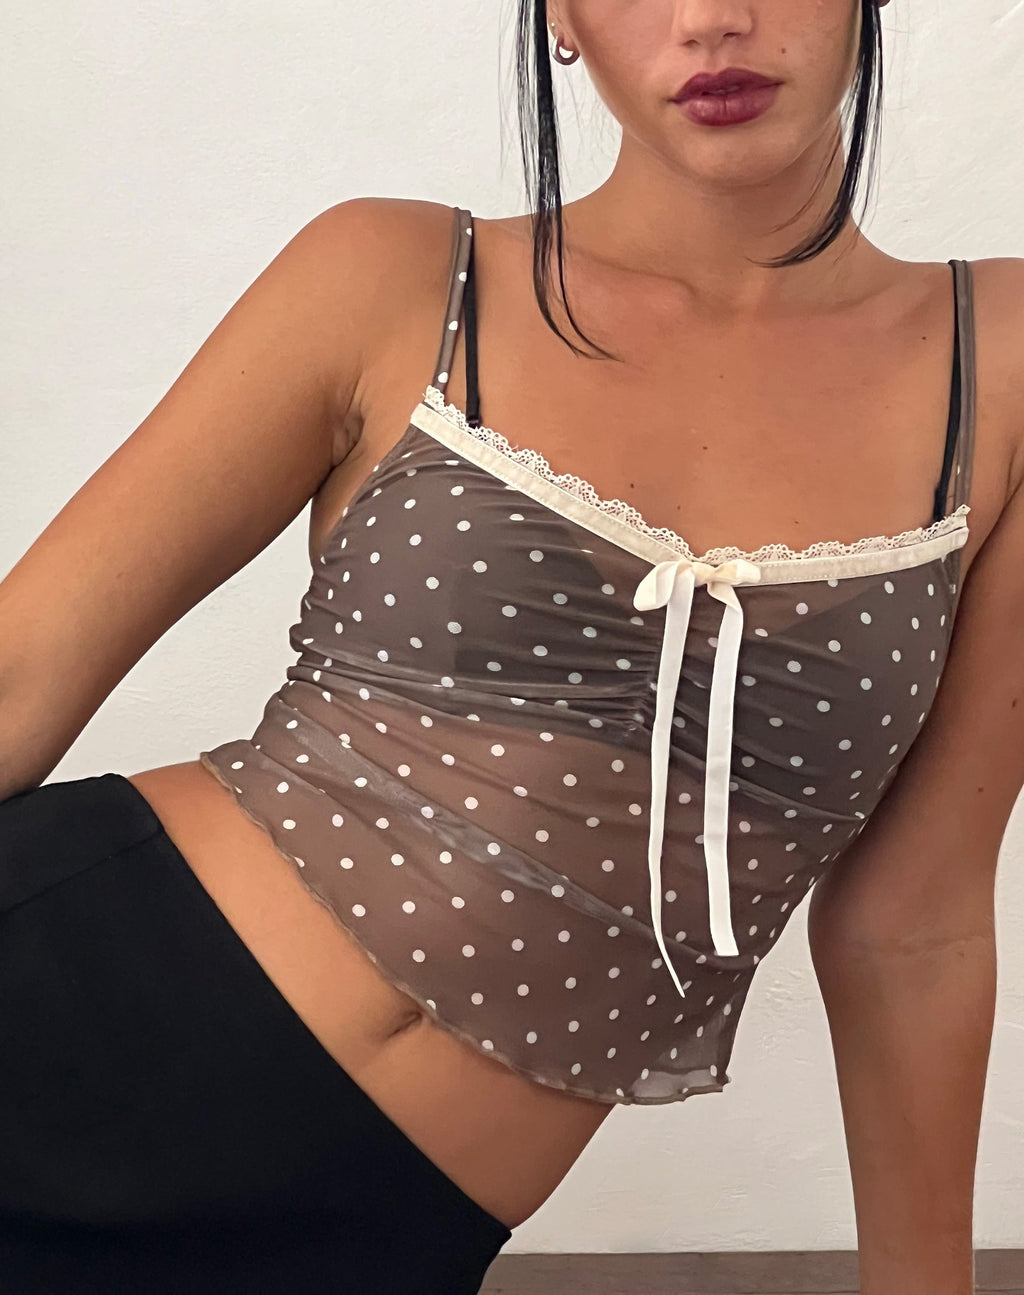 Norde Cami Top in Brown and White Polka